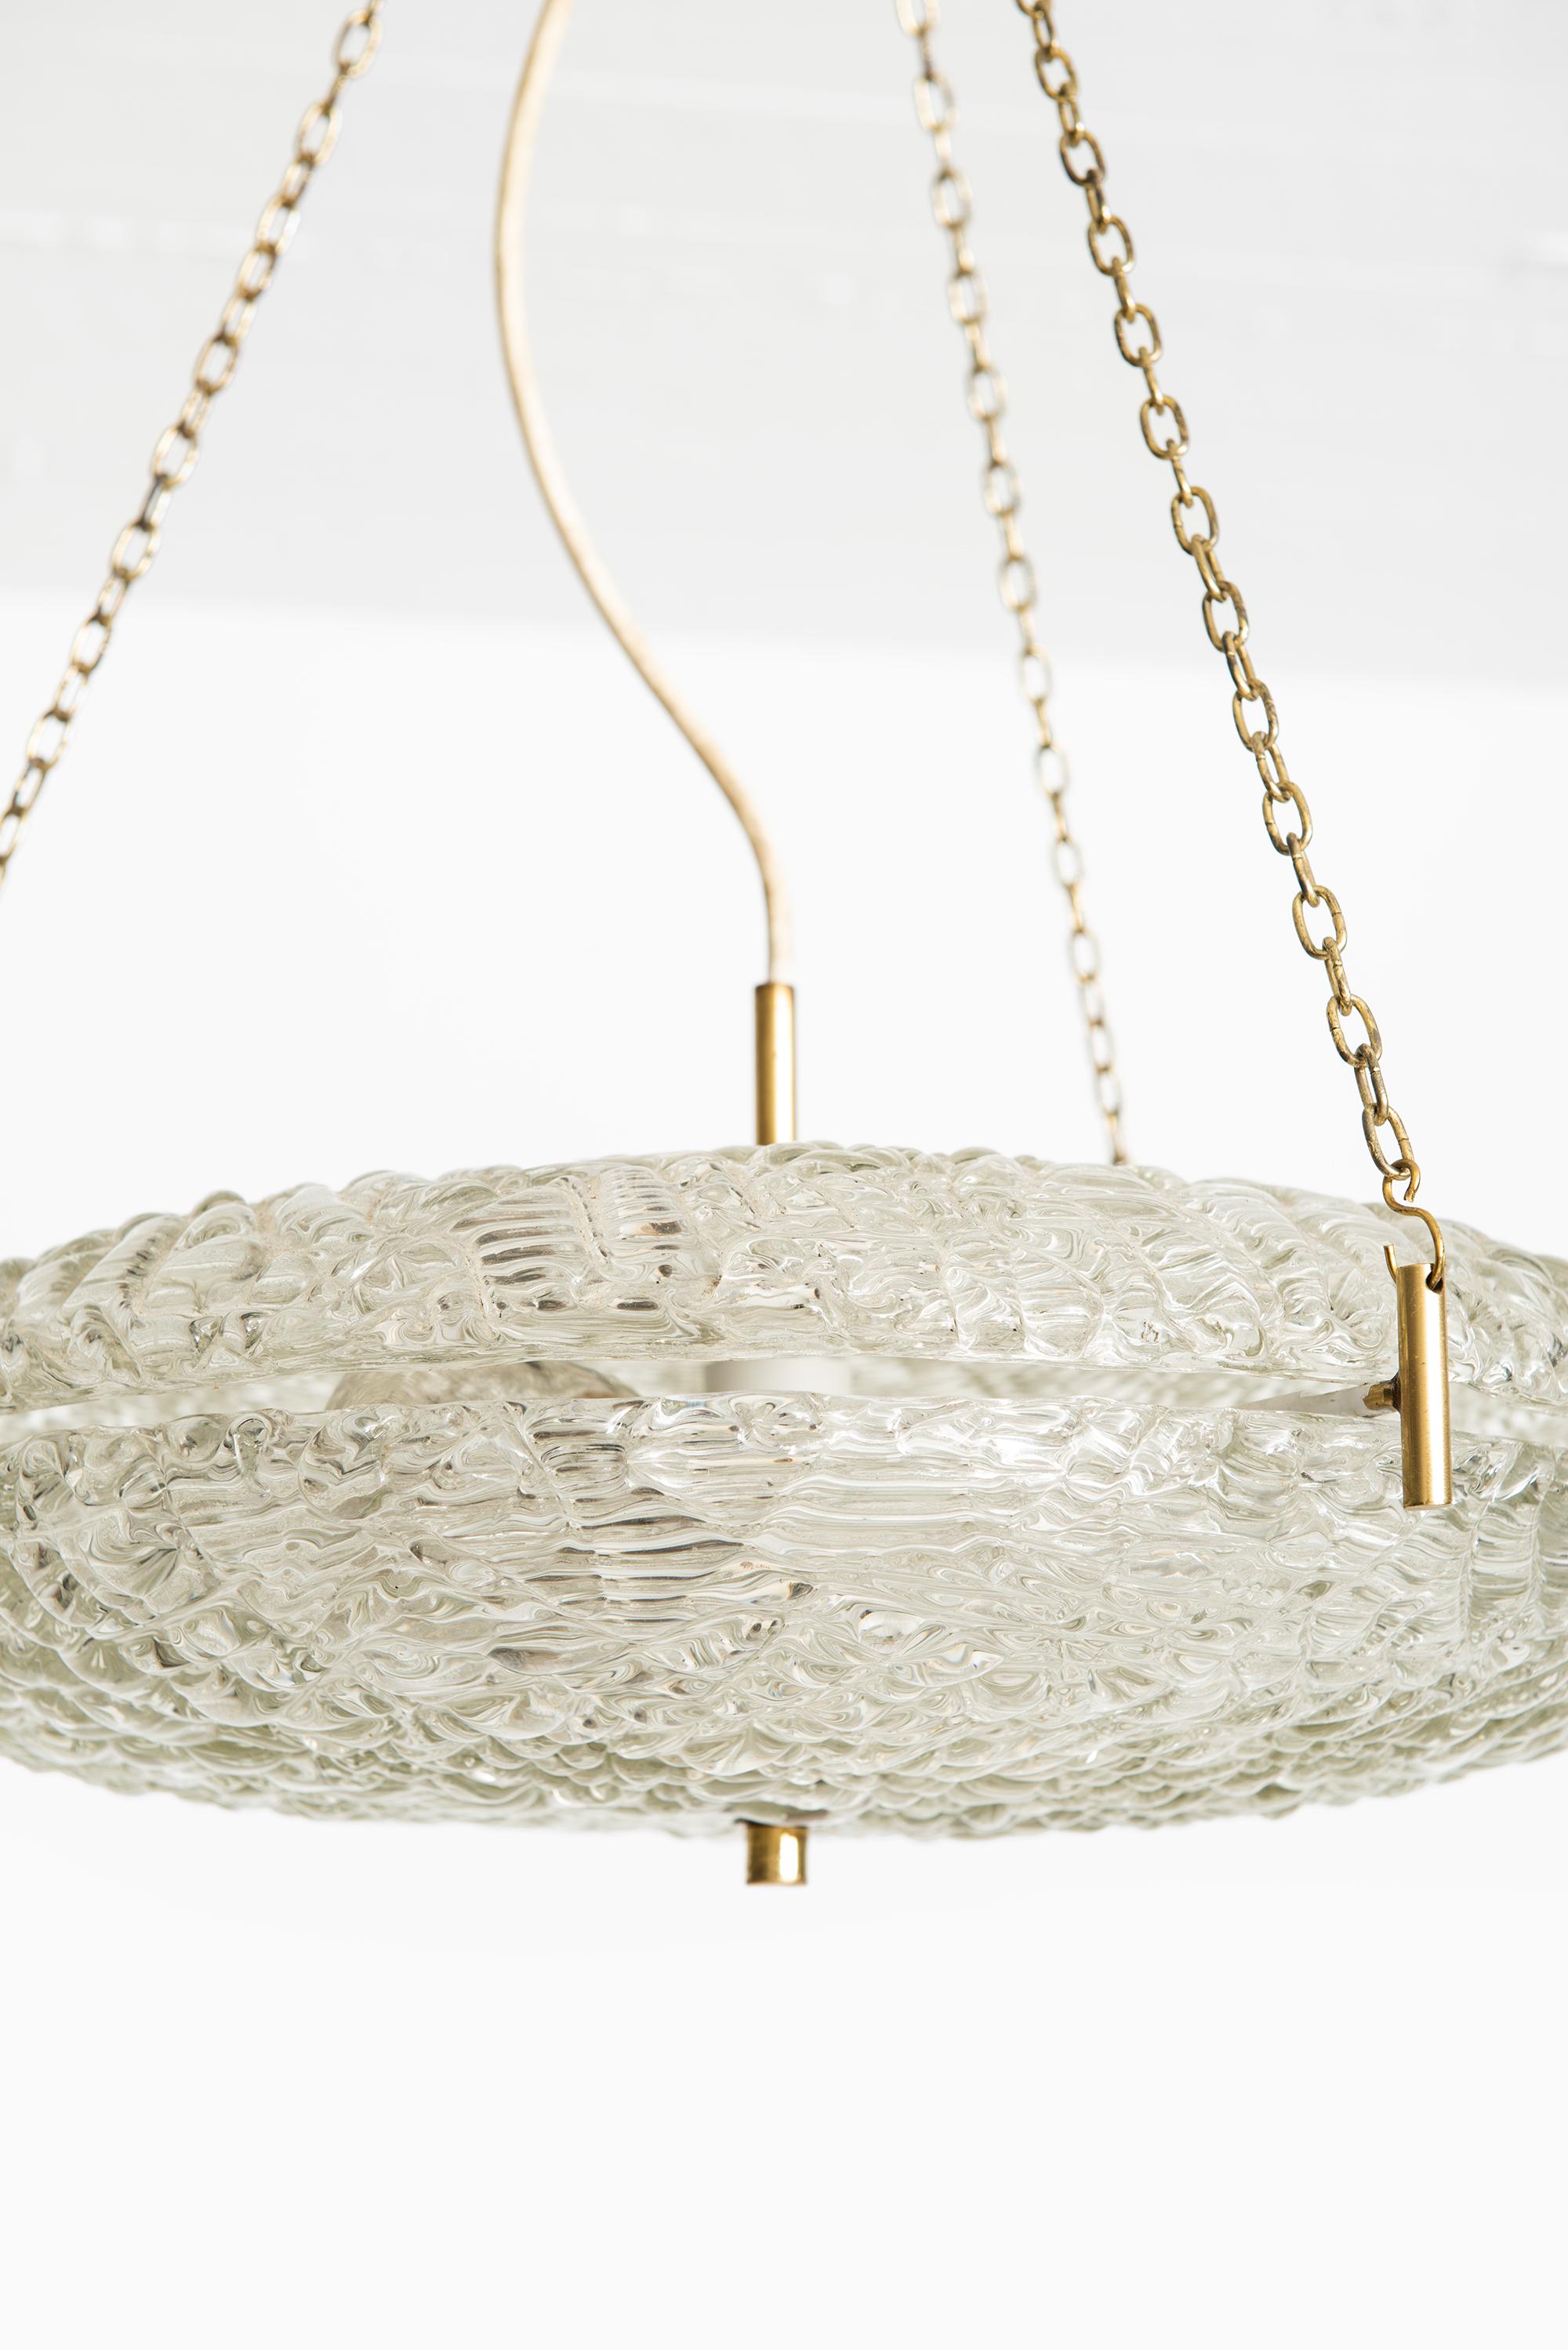 Swedish Carl Fagerlund Ceiling Lamp in Brass and Glass by Orrefors in Sweden